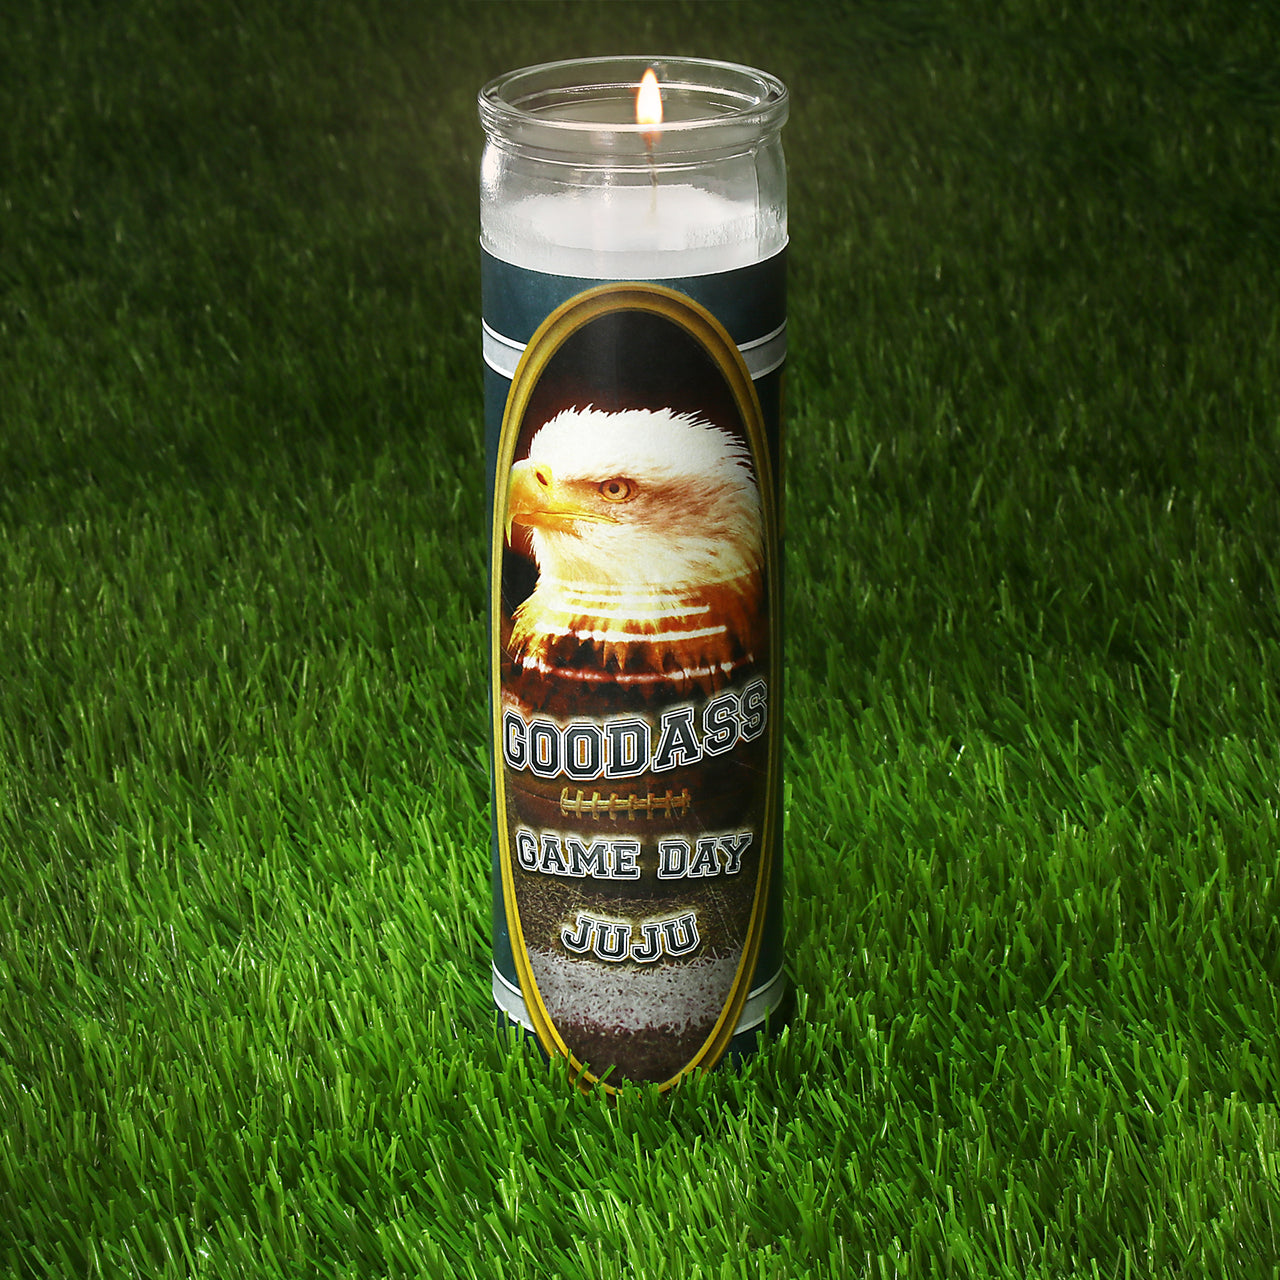 The Philadelphia Football Game Day Juju Unscented Prayer Candle